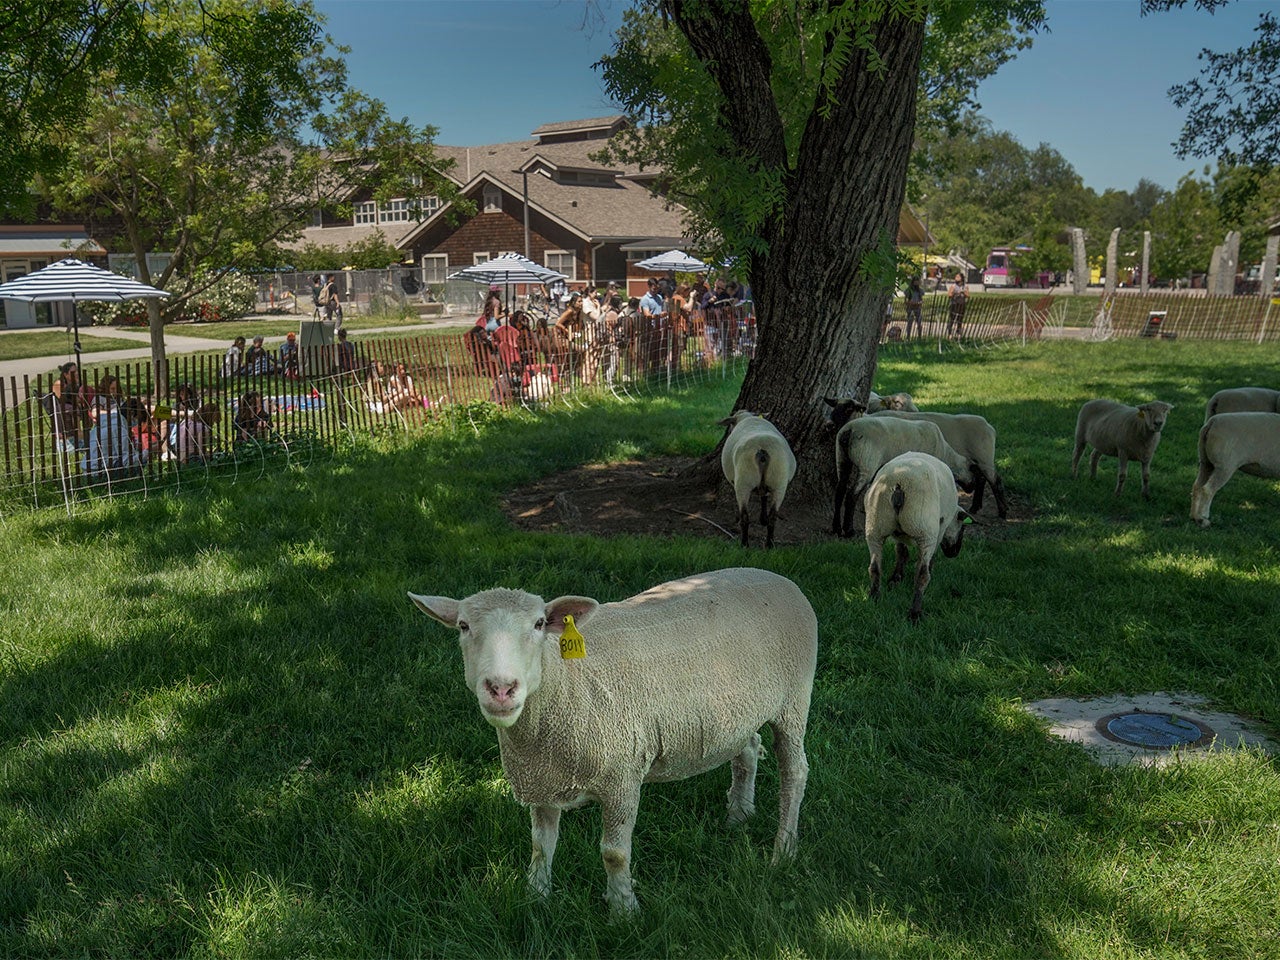 Sheep calmly grazing on a grassy field at ˽̳ Davis, with one sheep looking toward the camera and students painting in the background, shaded by a large tree.